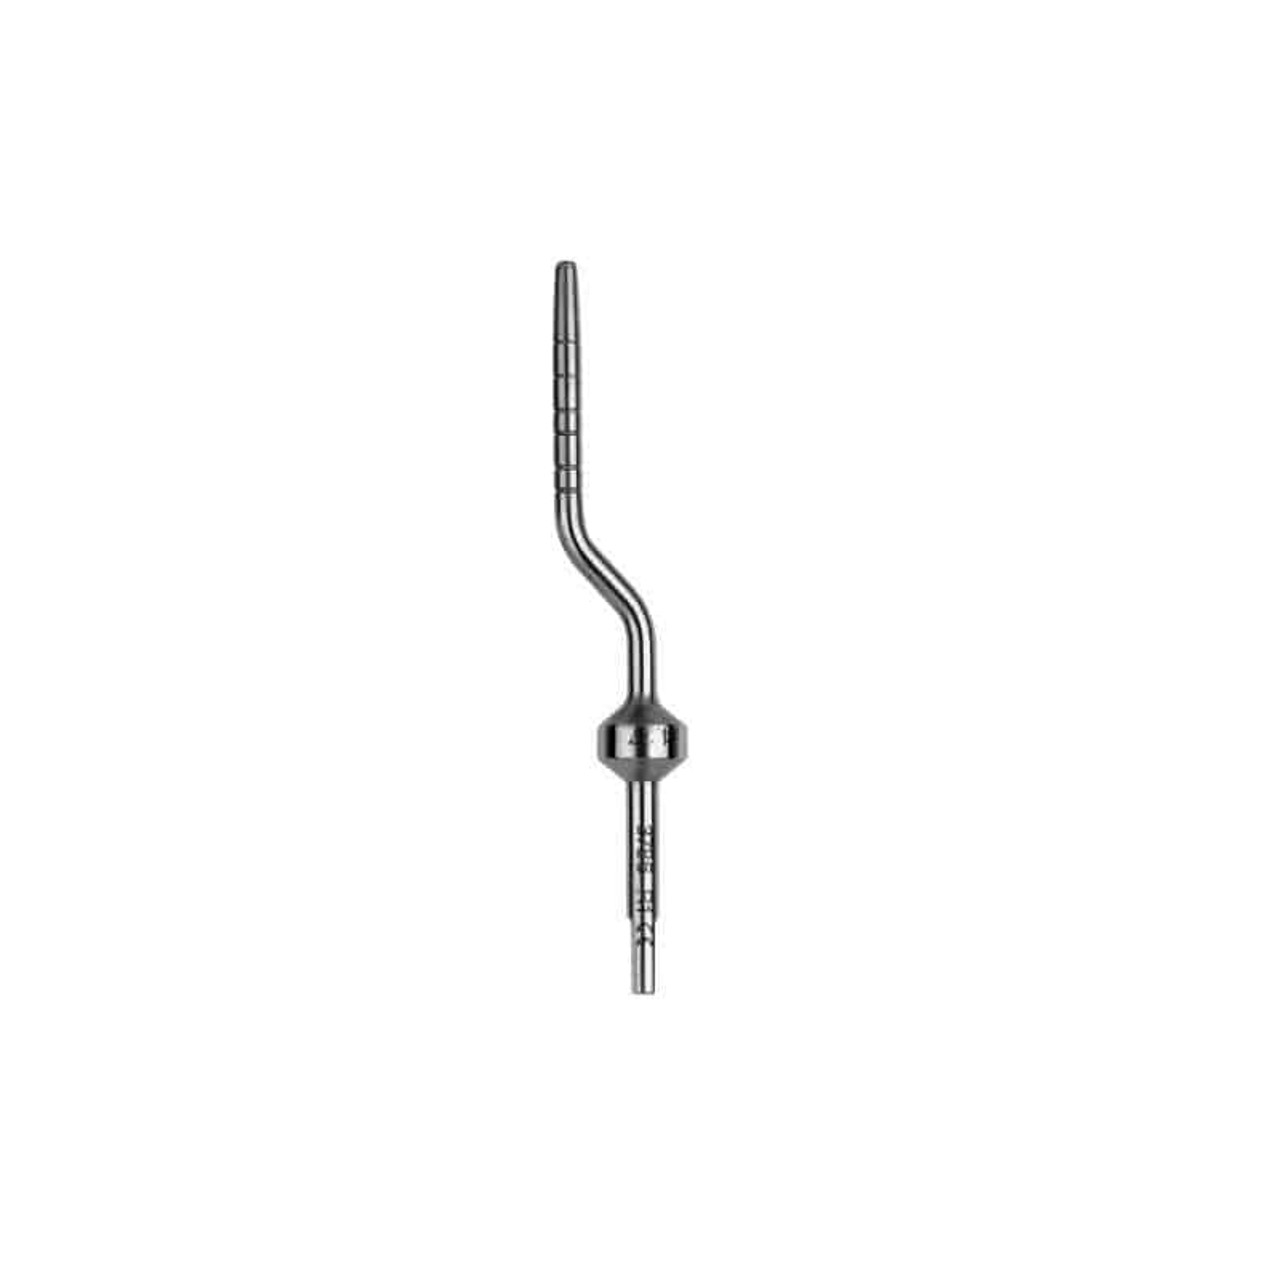 Hu-Friedy - 2.7 mm Osteotome Tapered Convex - Angulated Tip